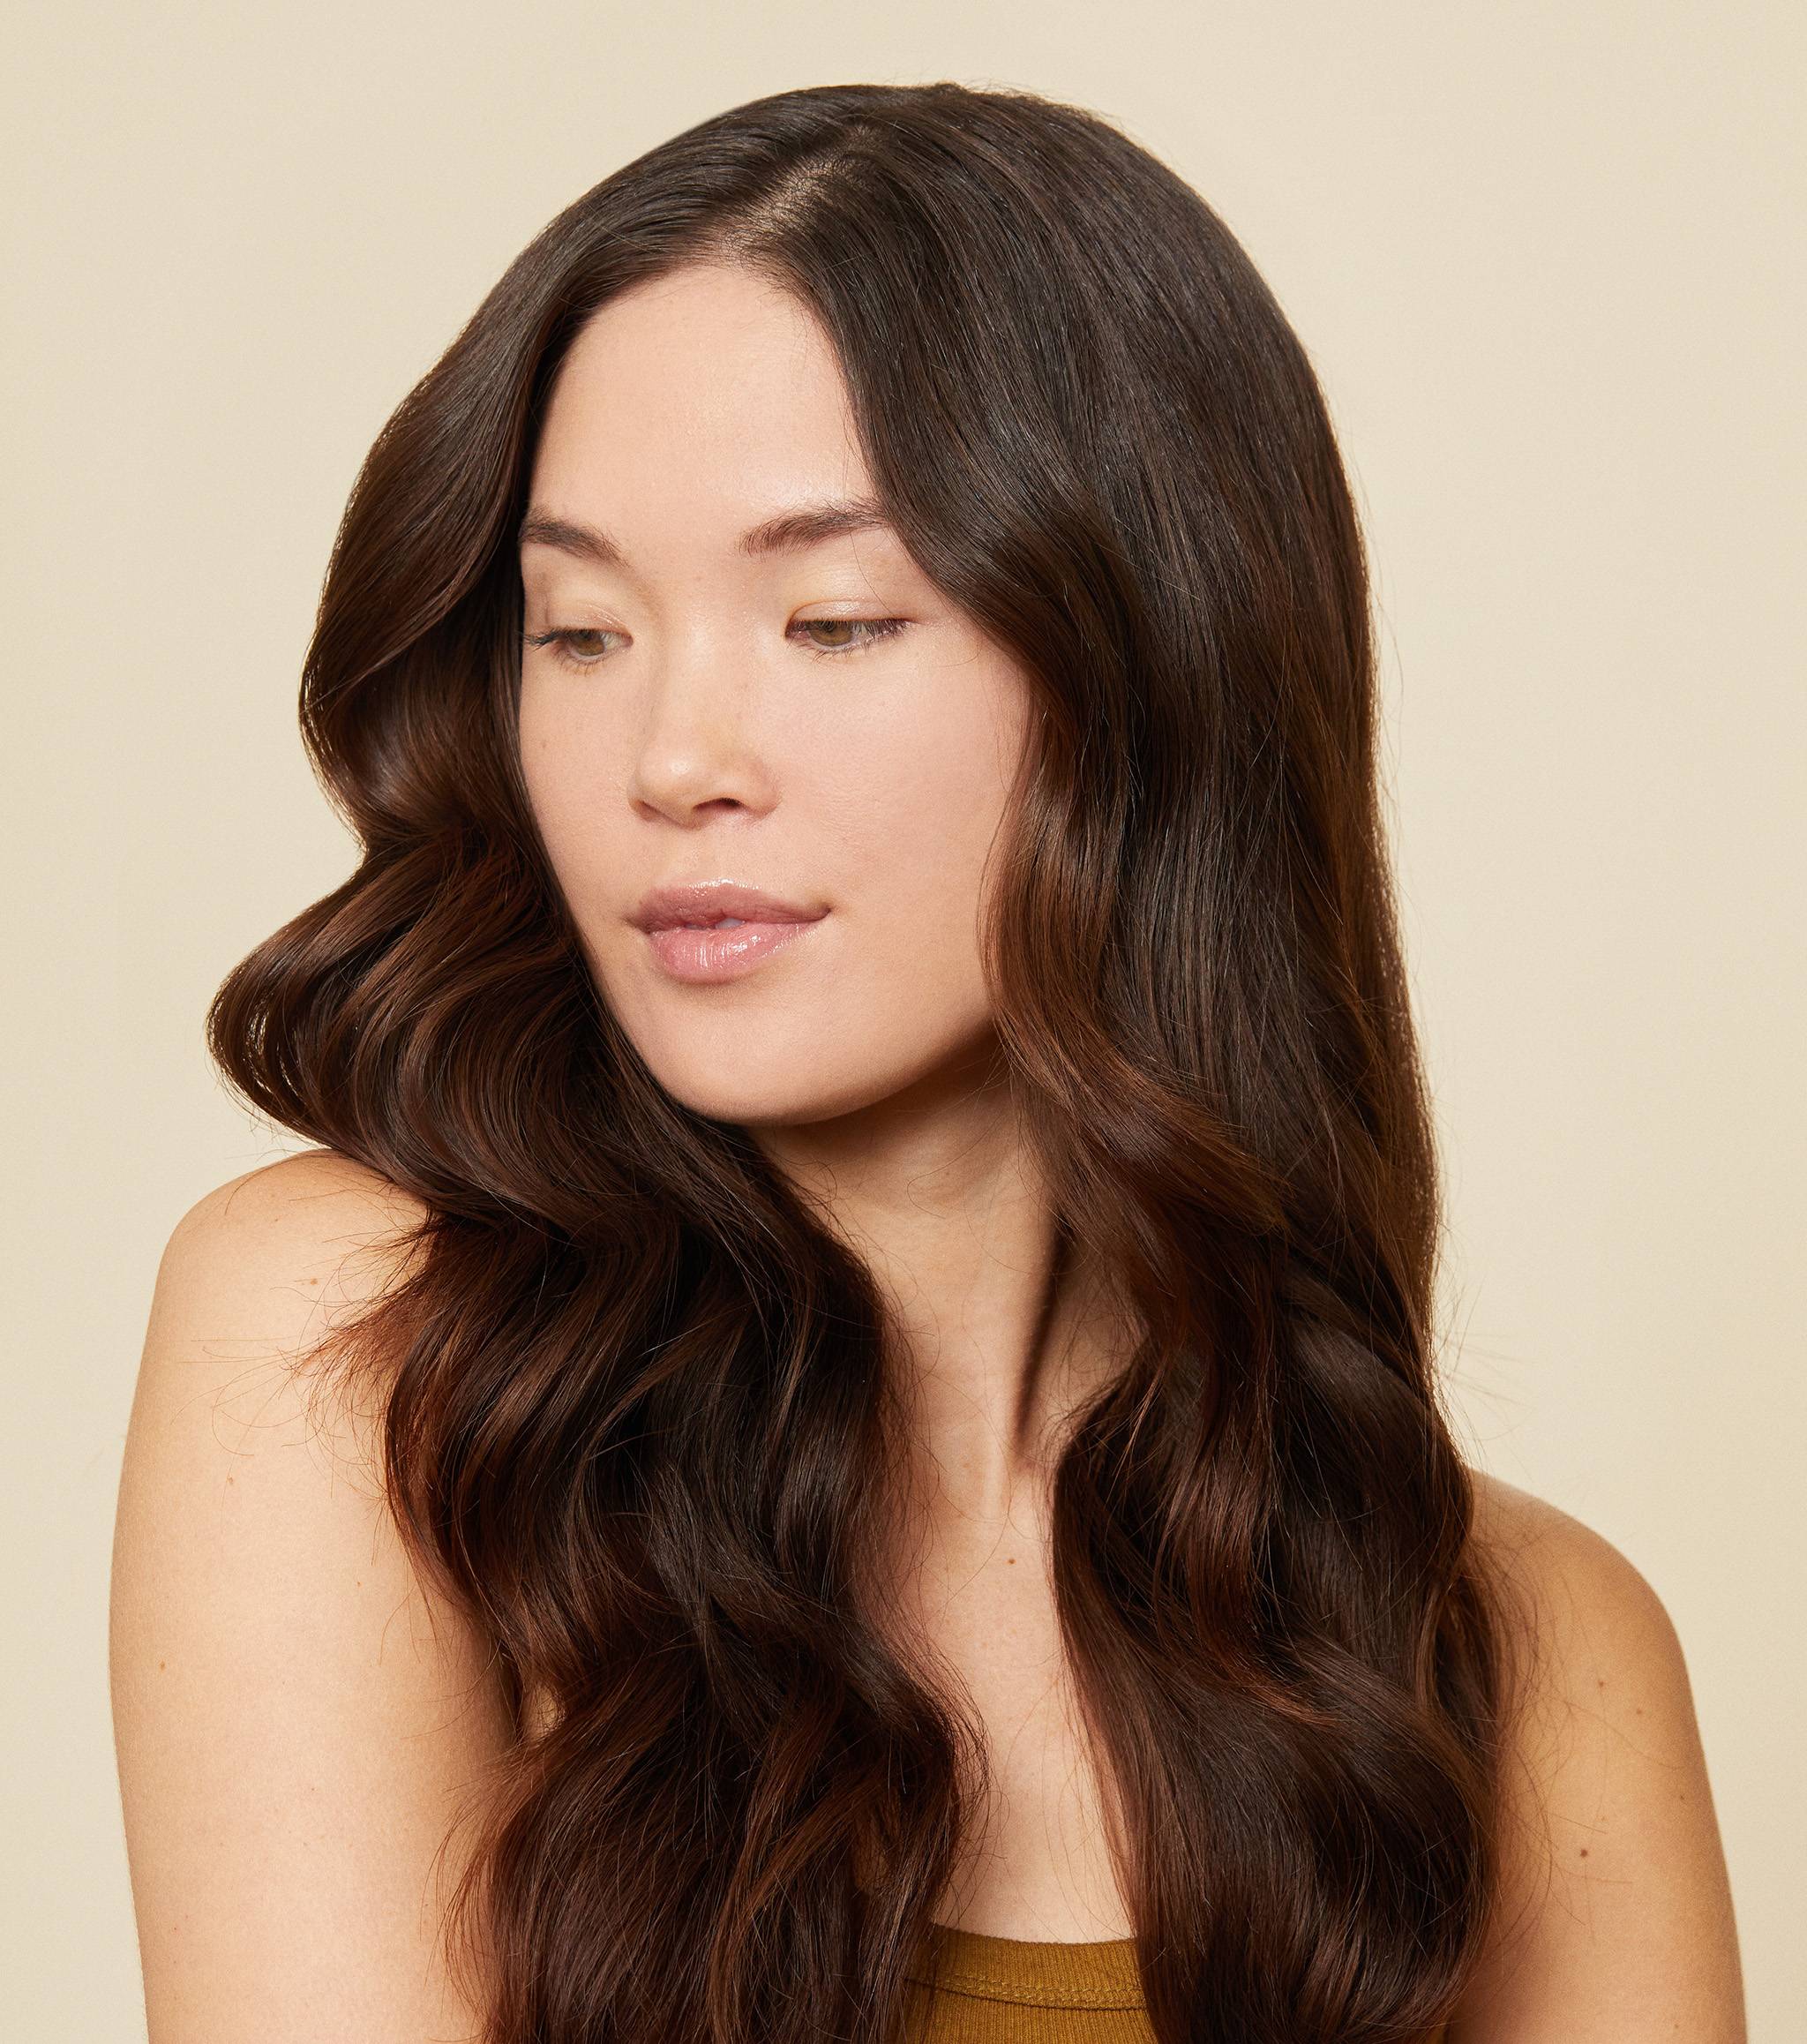 6 Spring Hair Trends You'll Want to Try